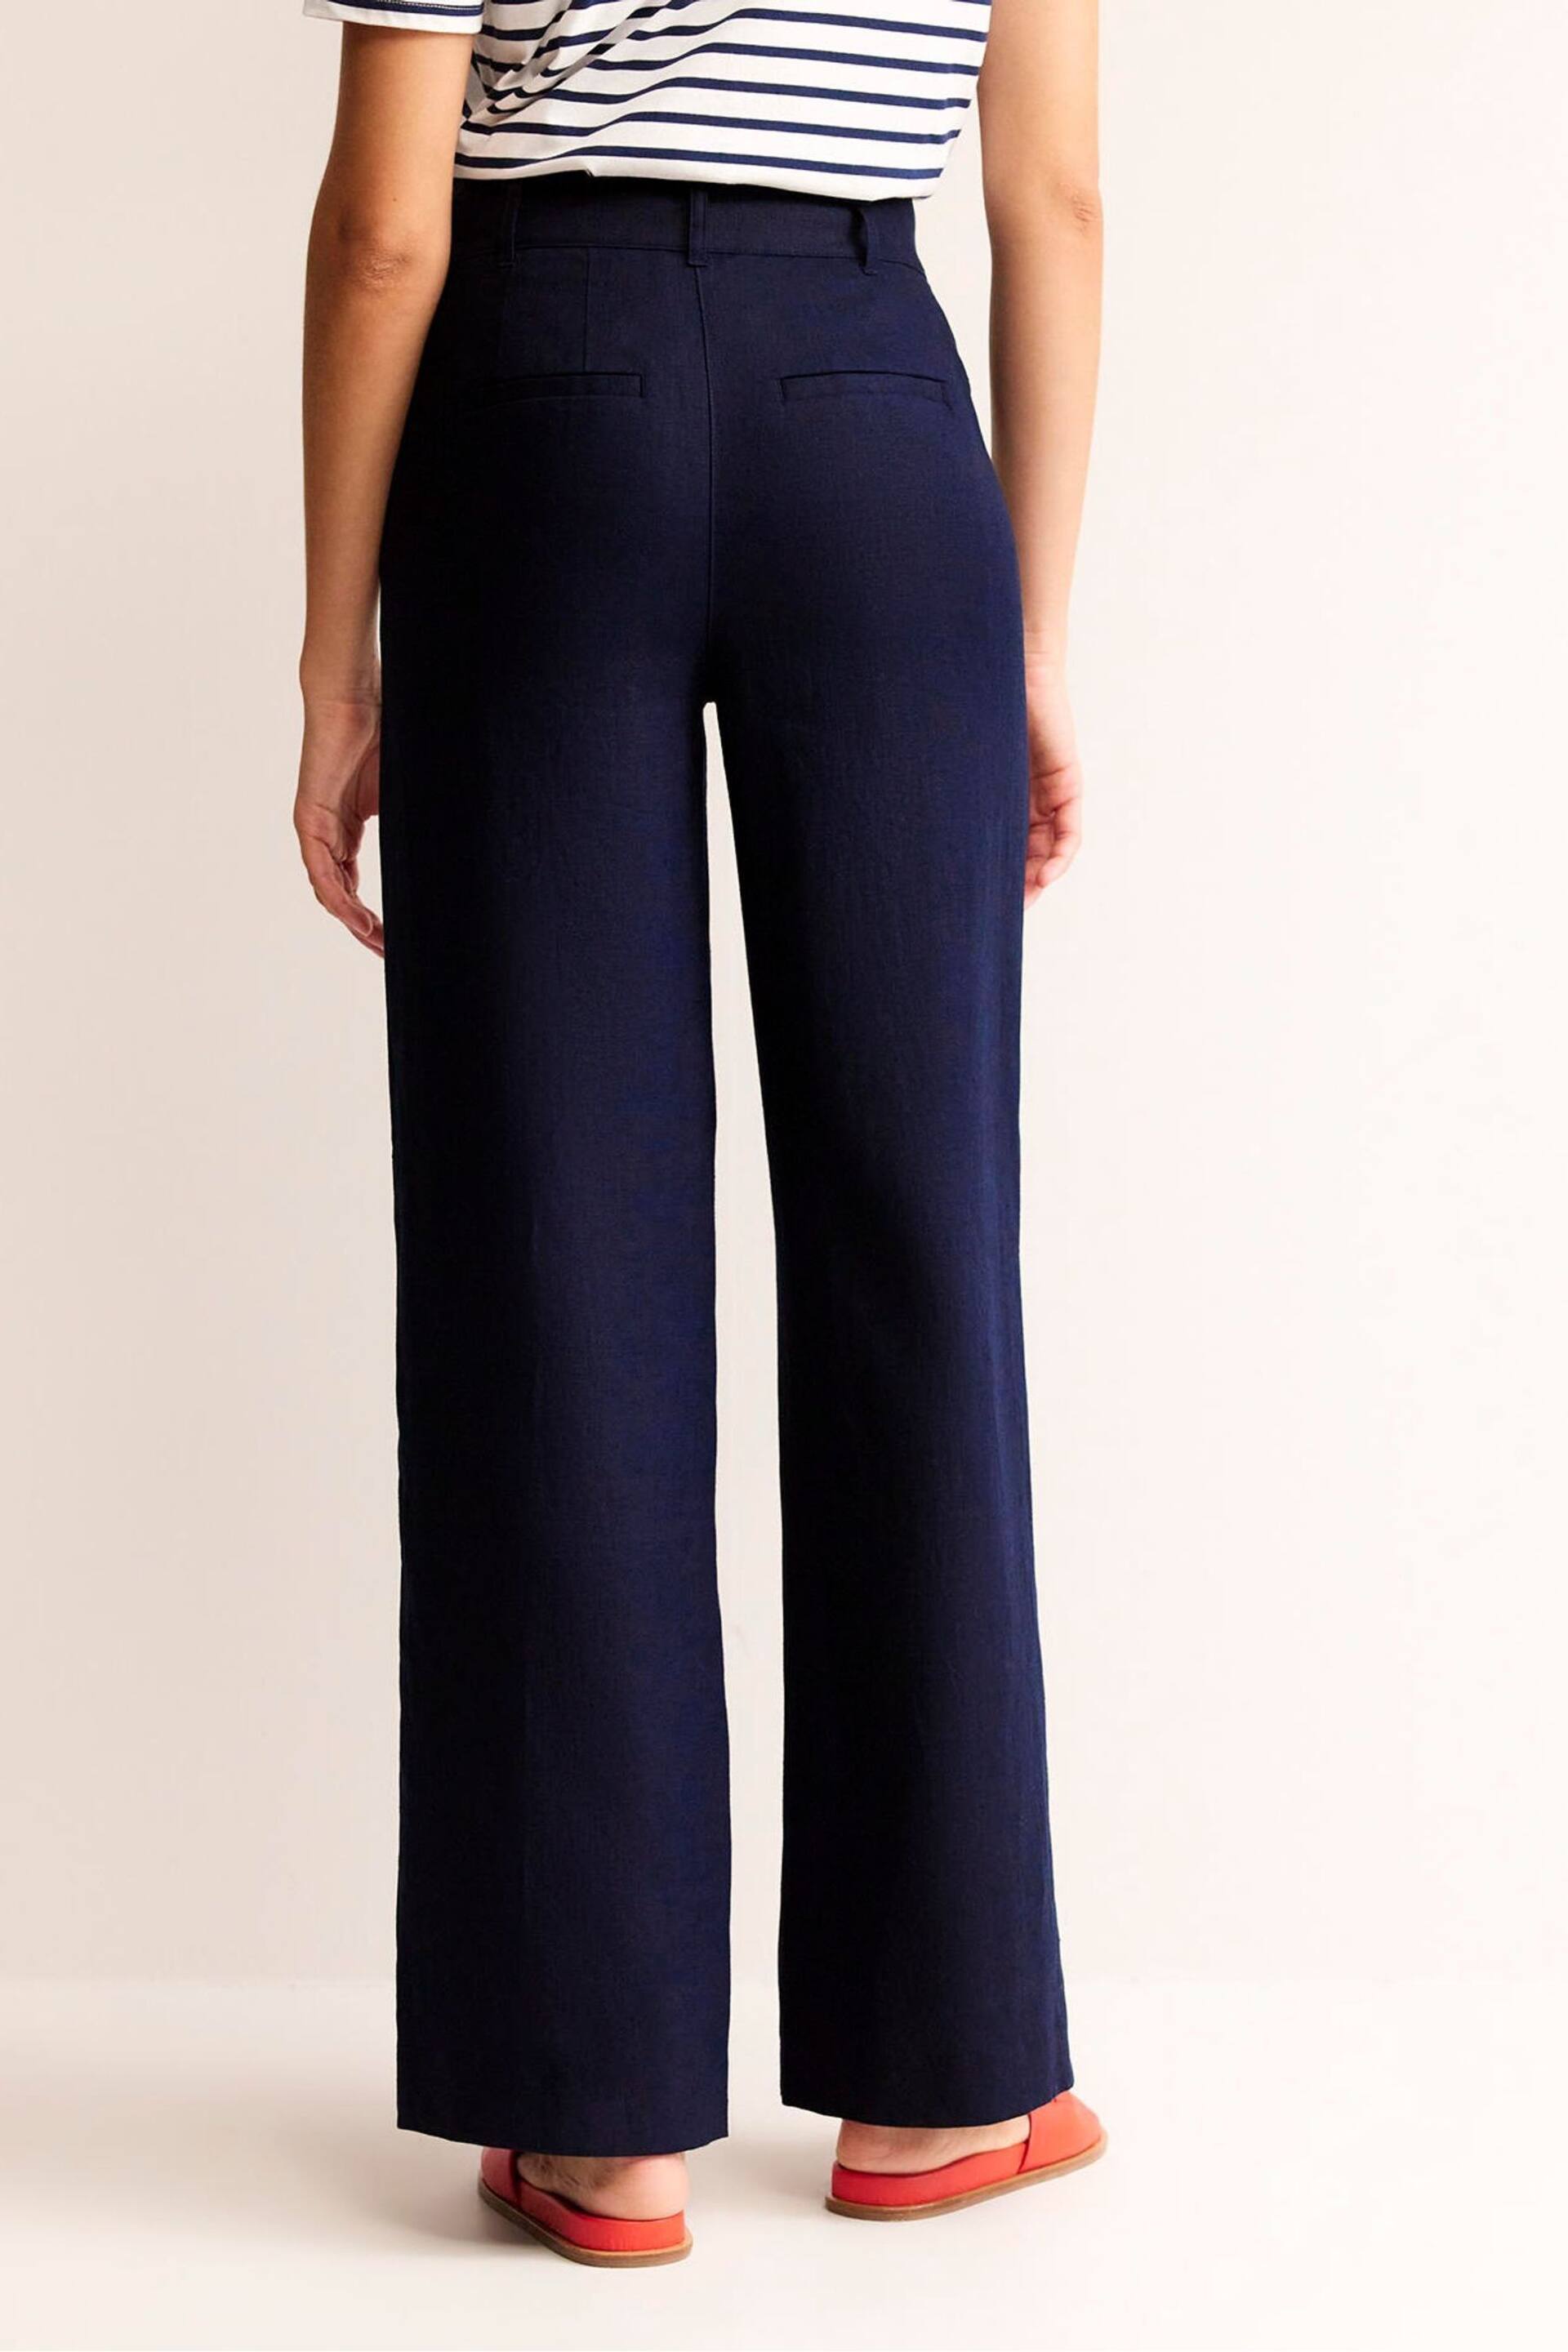 Boden Blue Westbourne Linen Trousers - Image 2 of 5